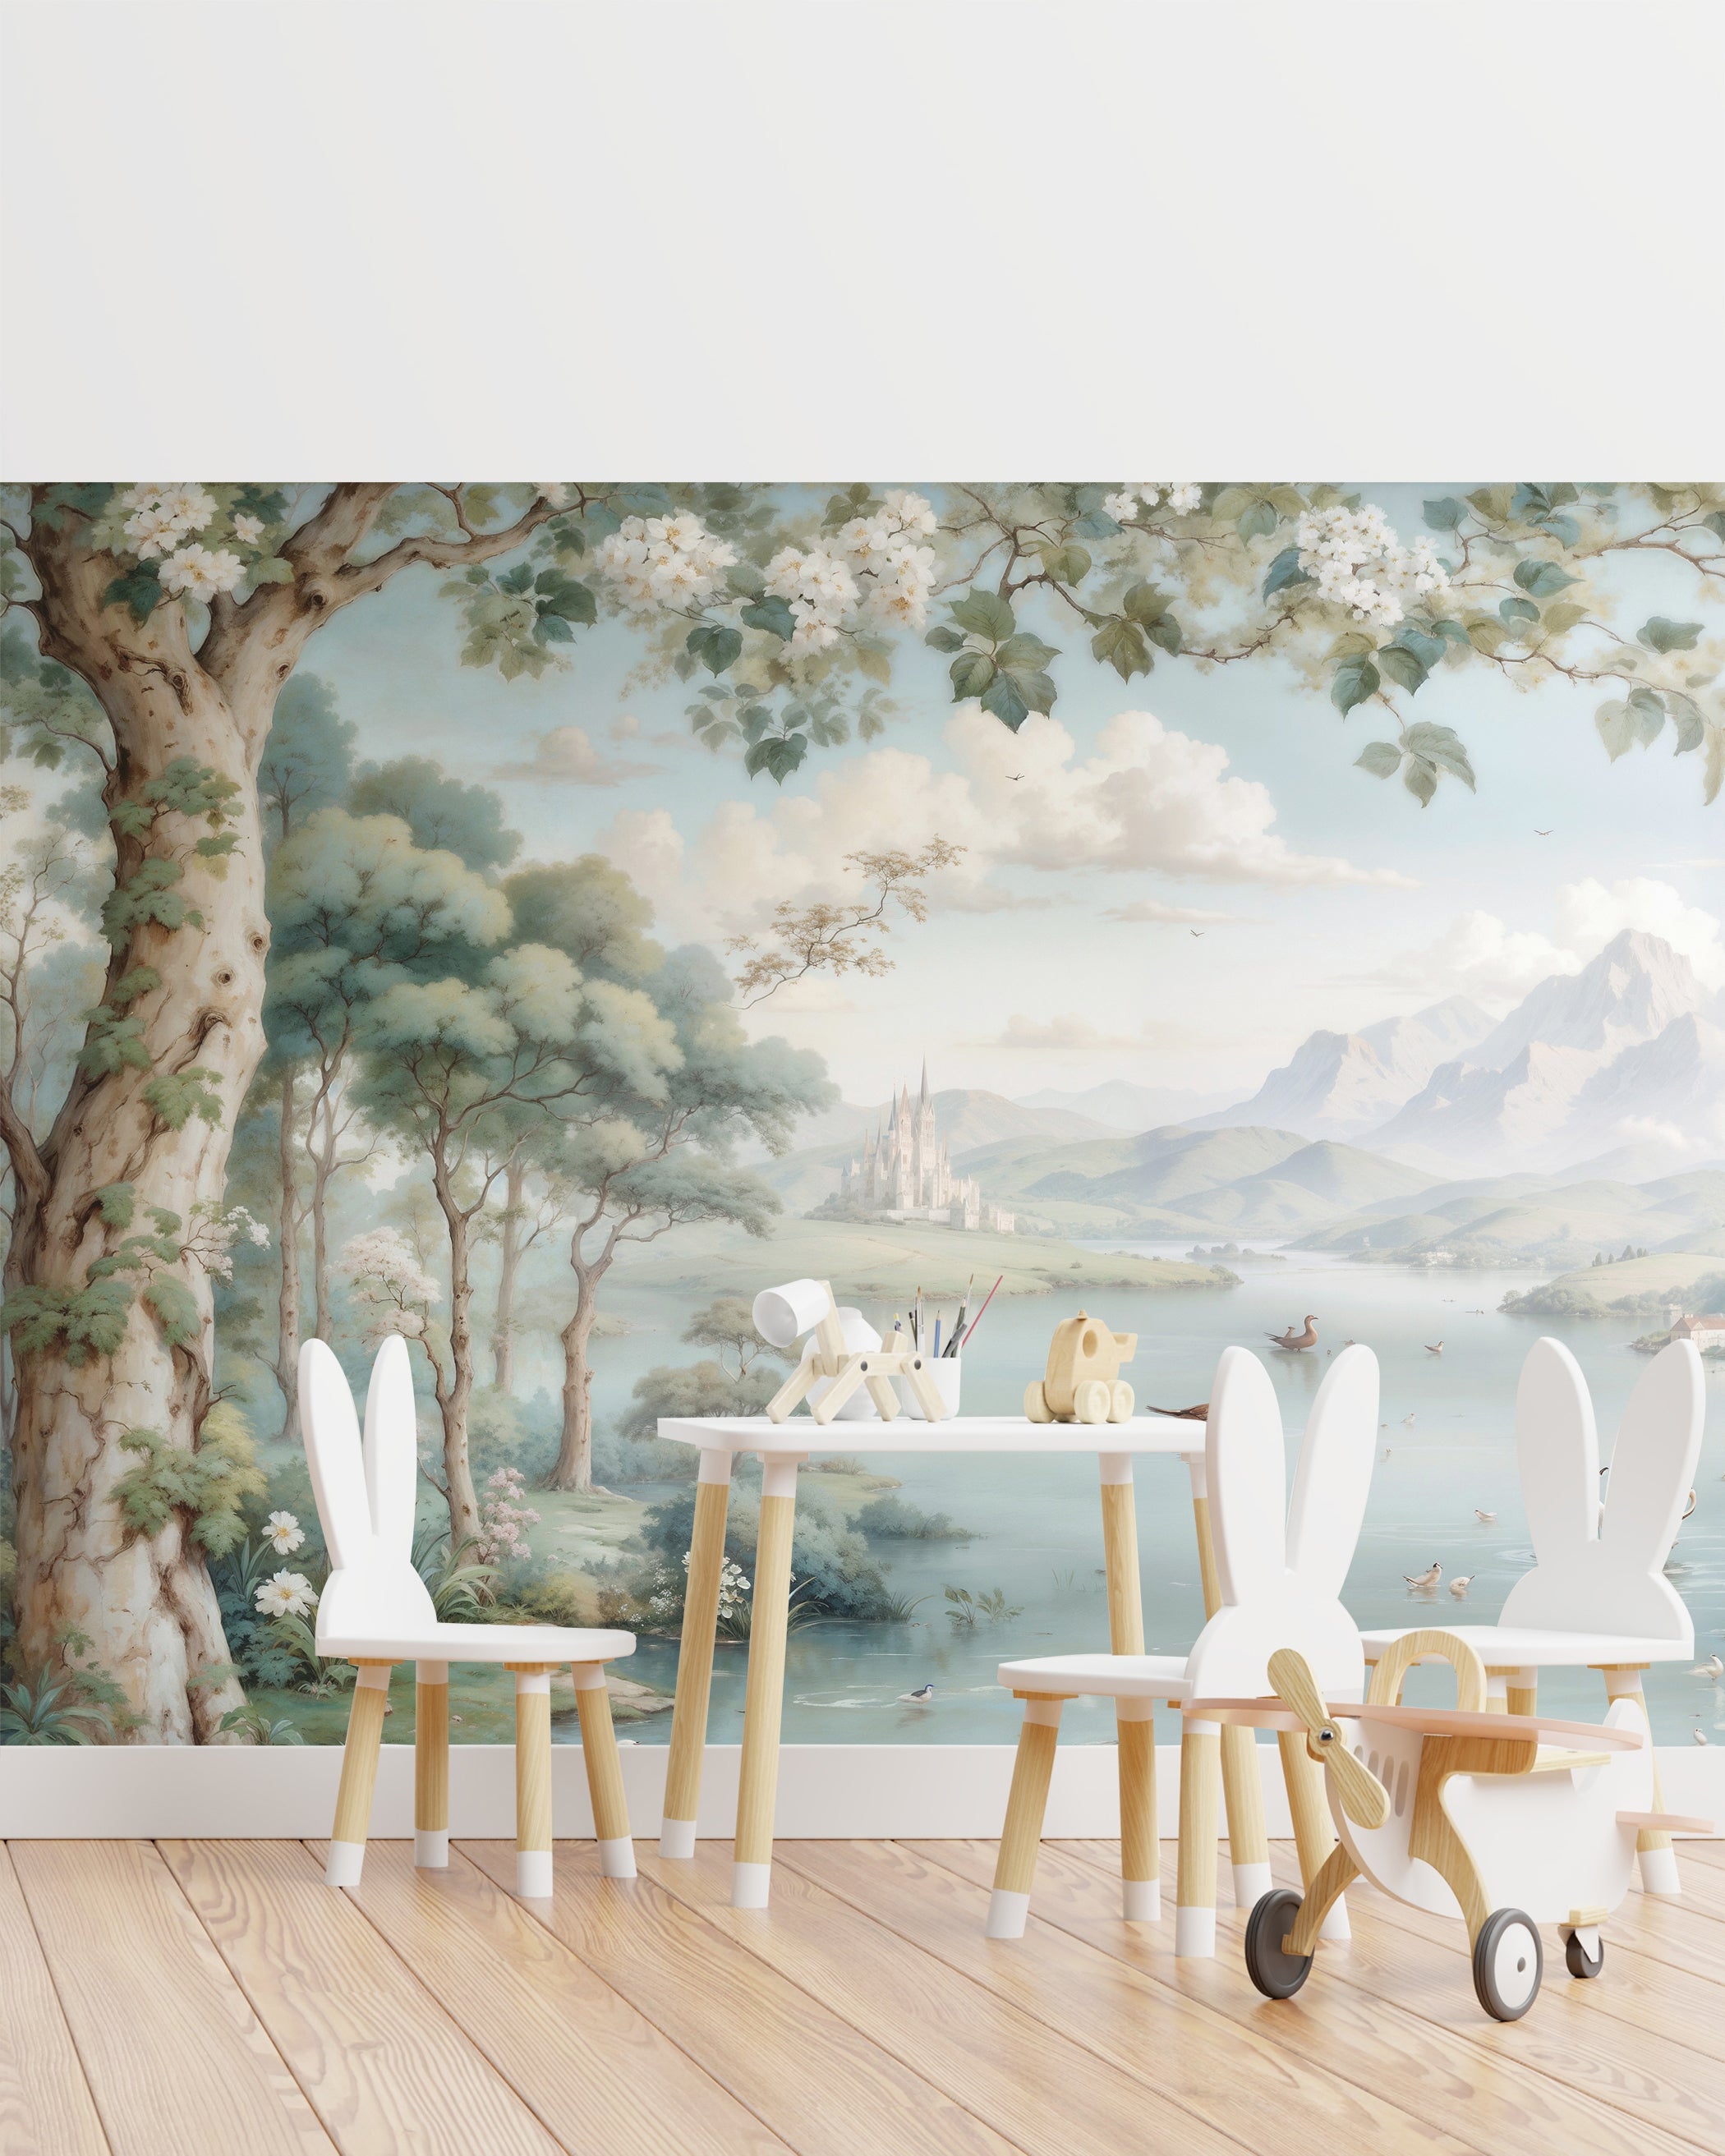 "Play area for children with Chamonix Valley mural as the backdrop, depicting lush trees, a calm lake, and a fairy-tale castle in the distance